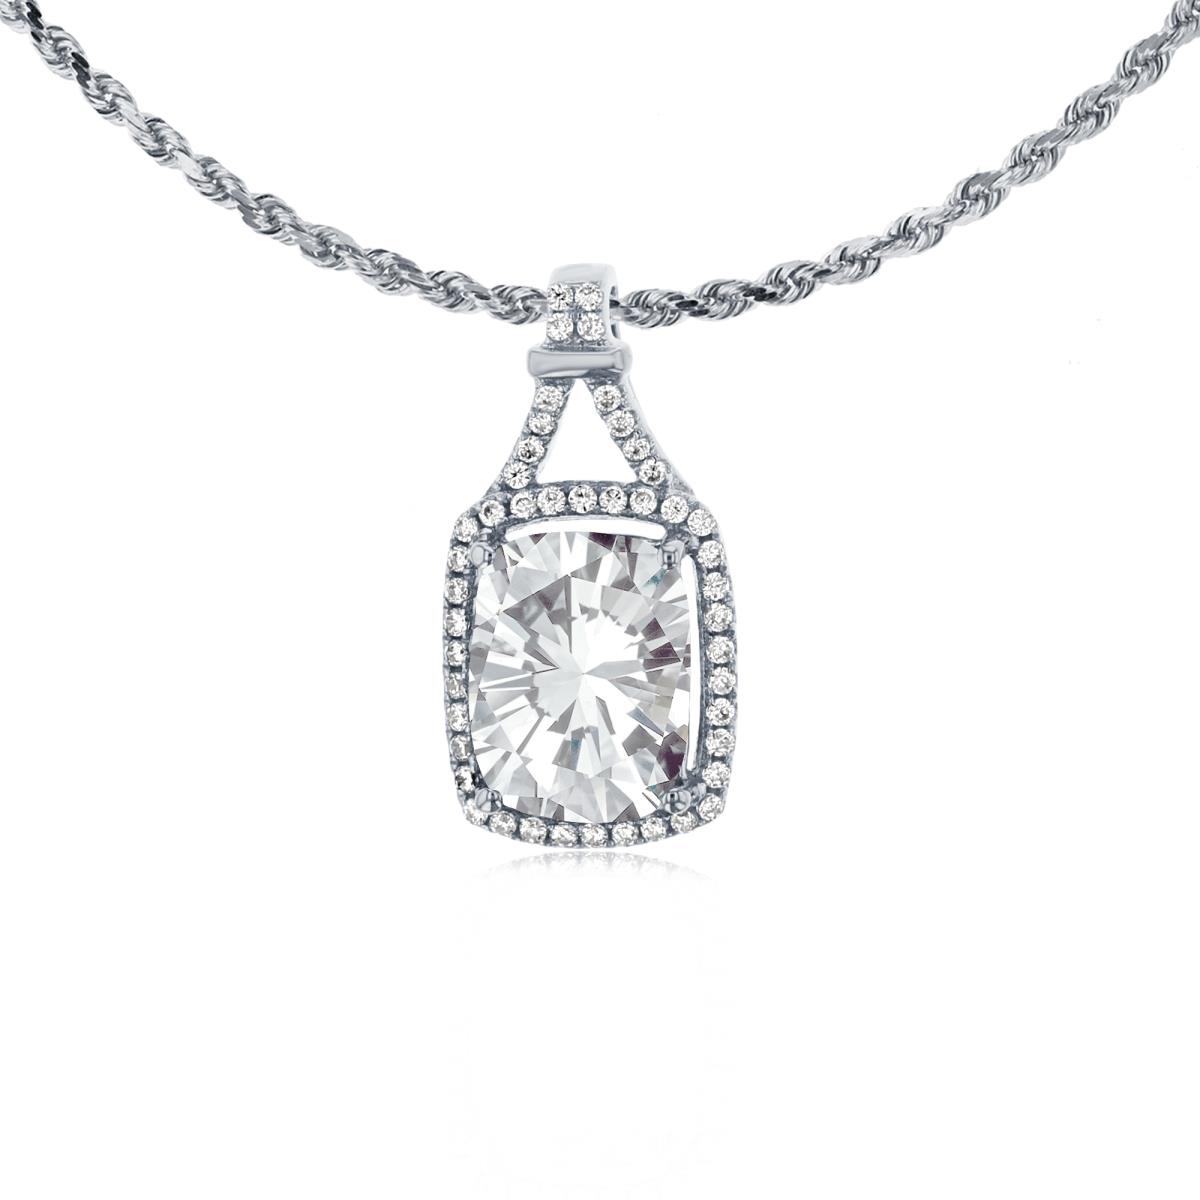 10K White Gold 8x6mm Cushion White Topaz & 0.13 CTTW Rd Diamonds Halo 18" Rope Chain Necklace